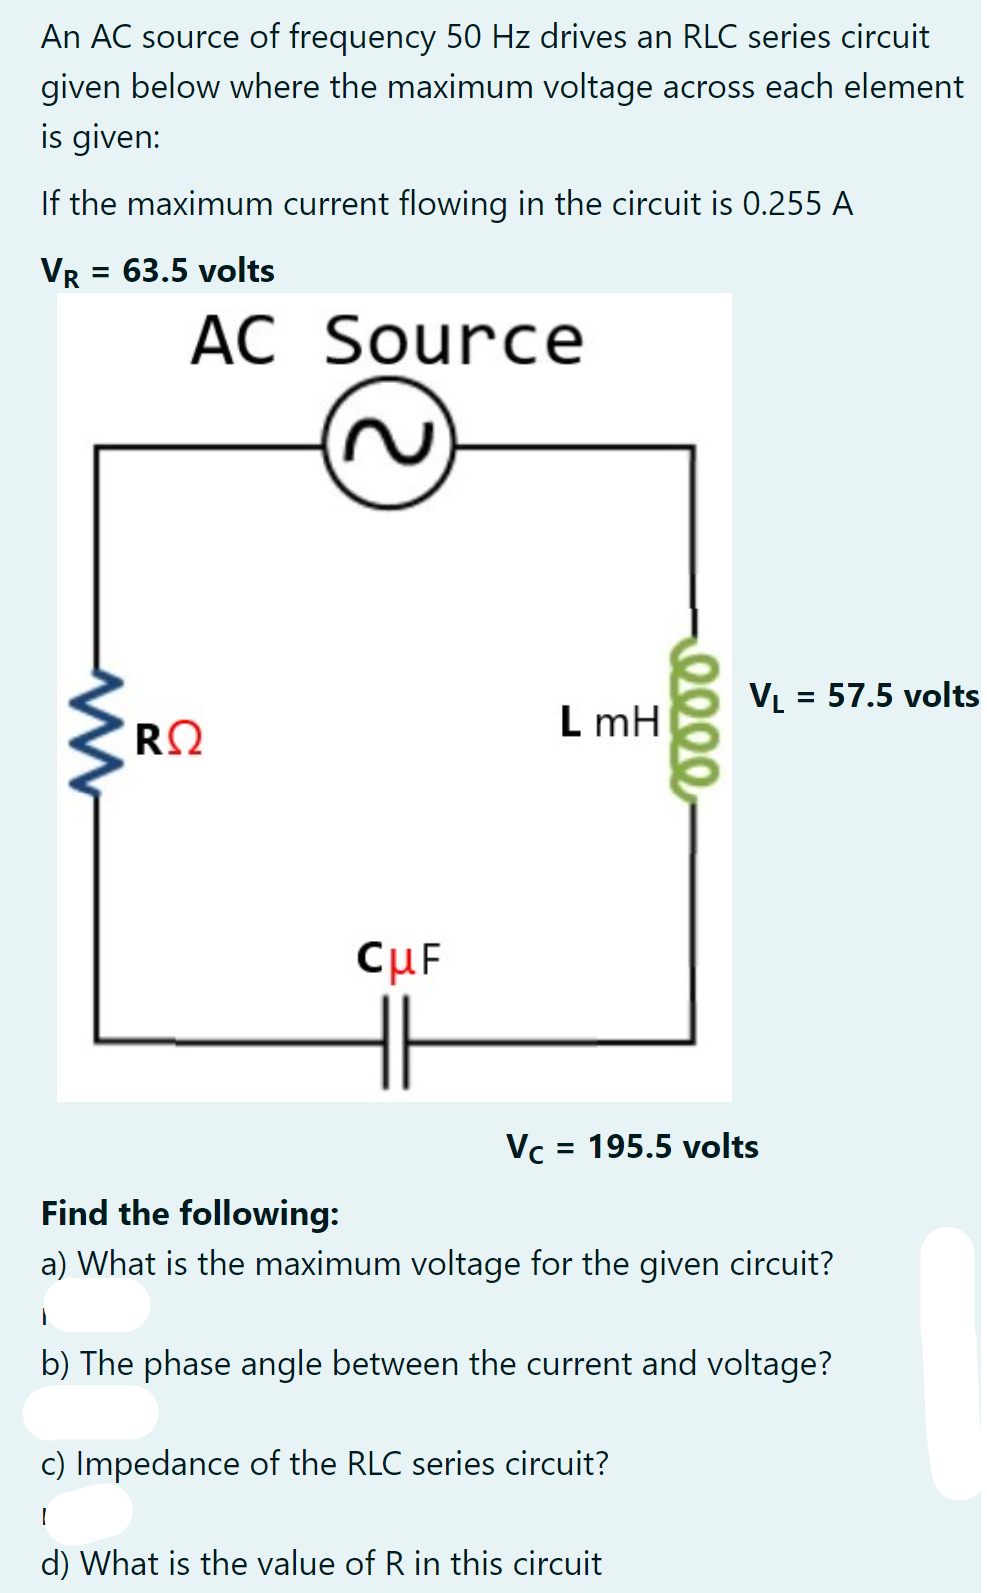 An AC source of frequency 50 Hz drives an RLC series circuit
given below where the maximum voltage across each element
is given:
If the maximum current flowing in the circuit is 0.255 A
VR = 63.5 volts
AC Source
VL = 57.5 volts
L mH
CuF
Vc = 195.5 volts
Find the following:
a) What is the maximum voltage for the given circuit?
b) The phase angle between the current and voltage?
c) Impedance of the RLC series circuit?
d) What is the value of R in this circuit
